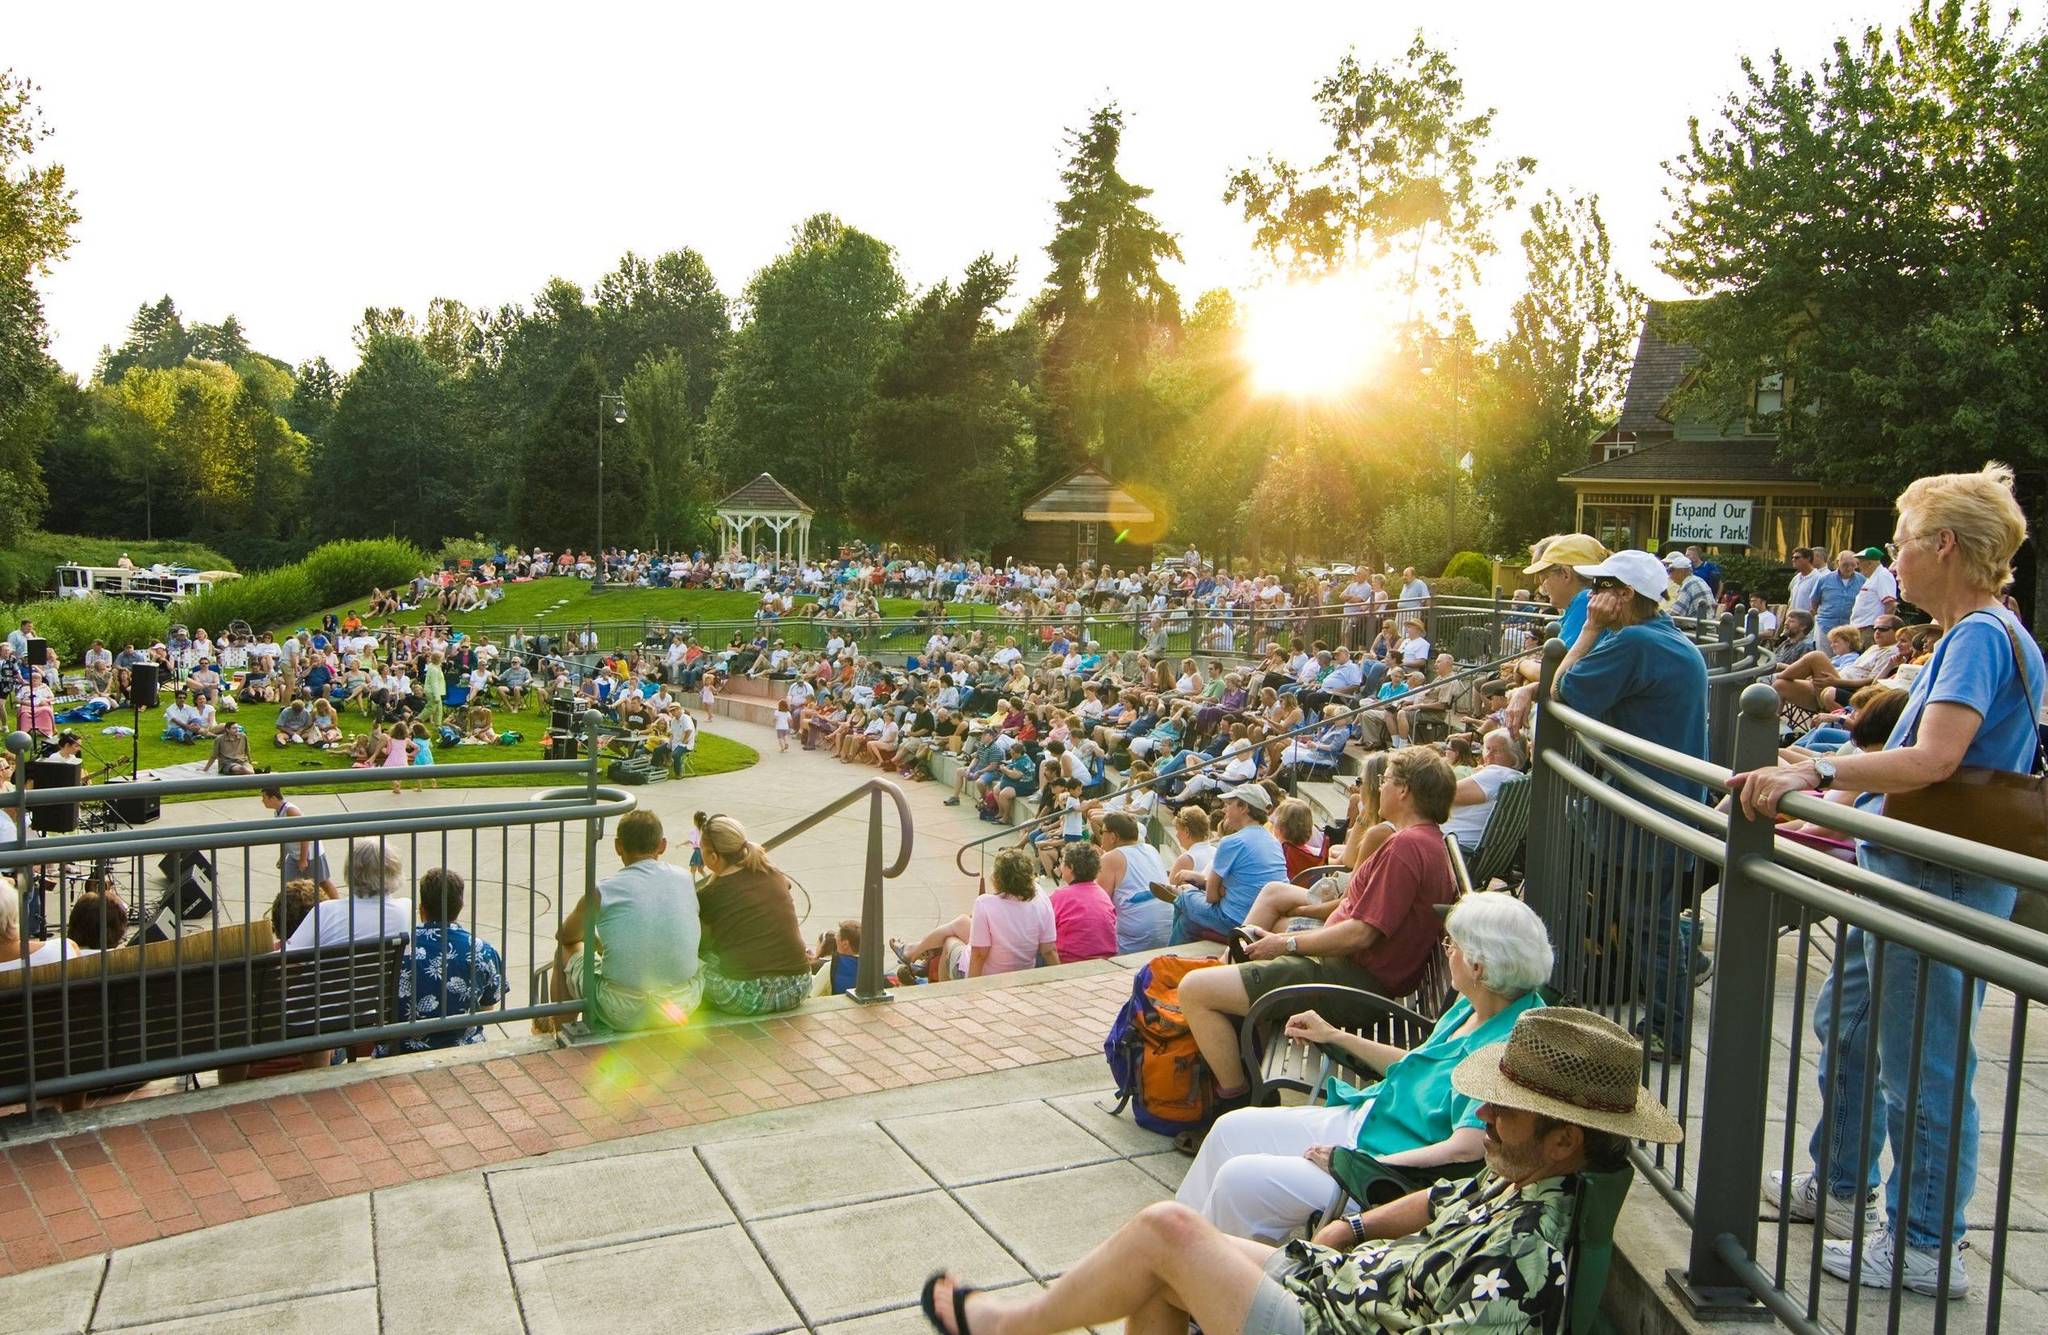 Music in the Park is returning to Bothell this summer. Photo courtesy of City of Bothell